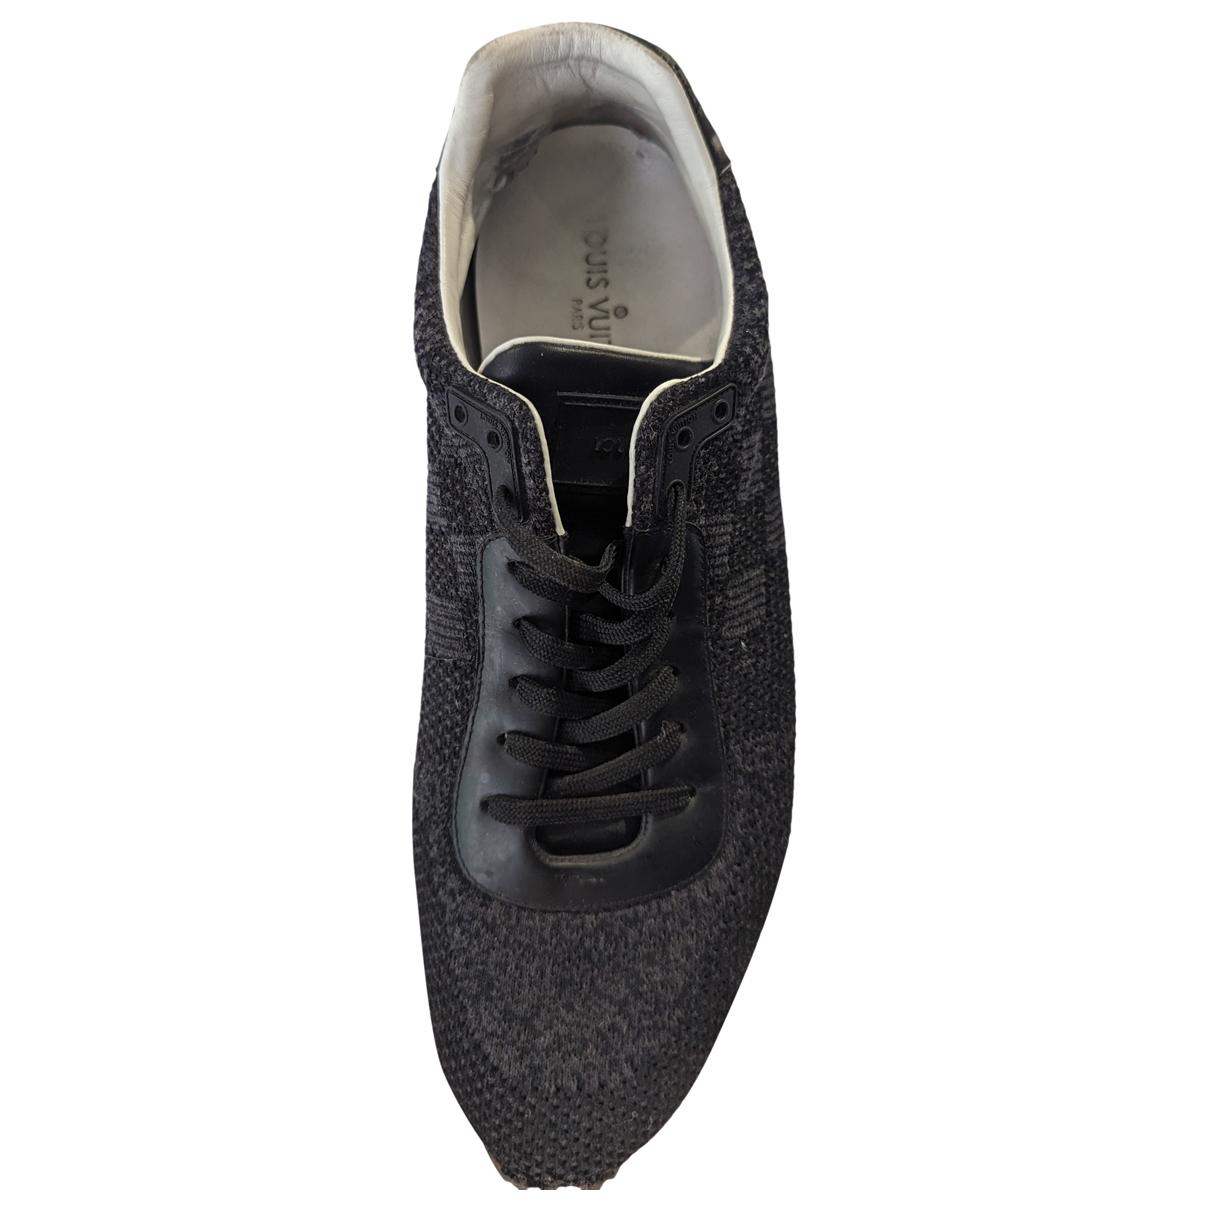 Lv runner active cloth low trainers Louis Vuitton Black size 11 UK in Cloth  - 32337850